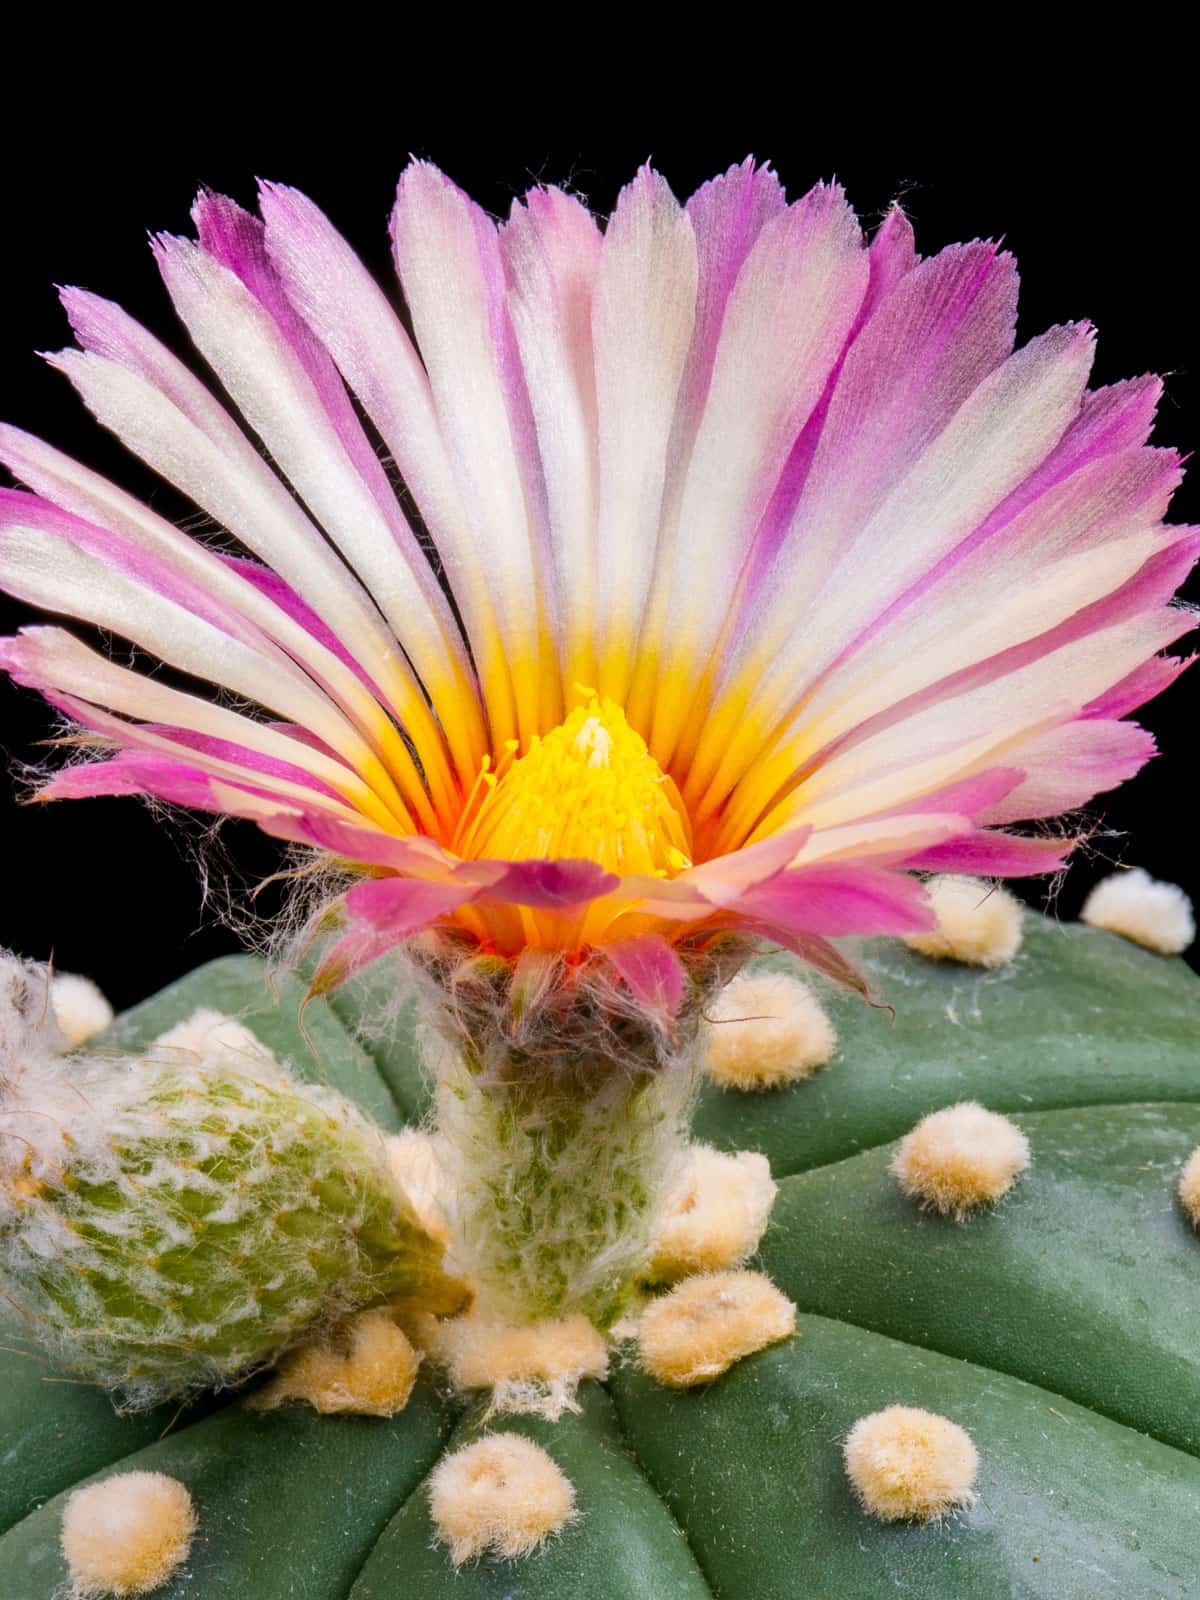 Light white to pink colored flowers of a Pink Sand Dollar Cactus